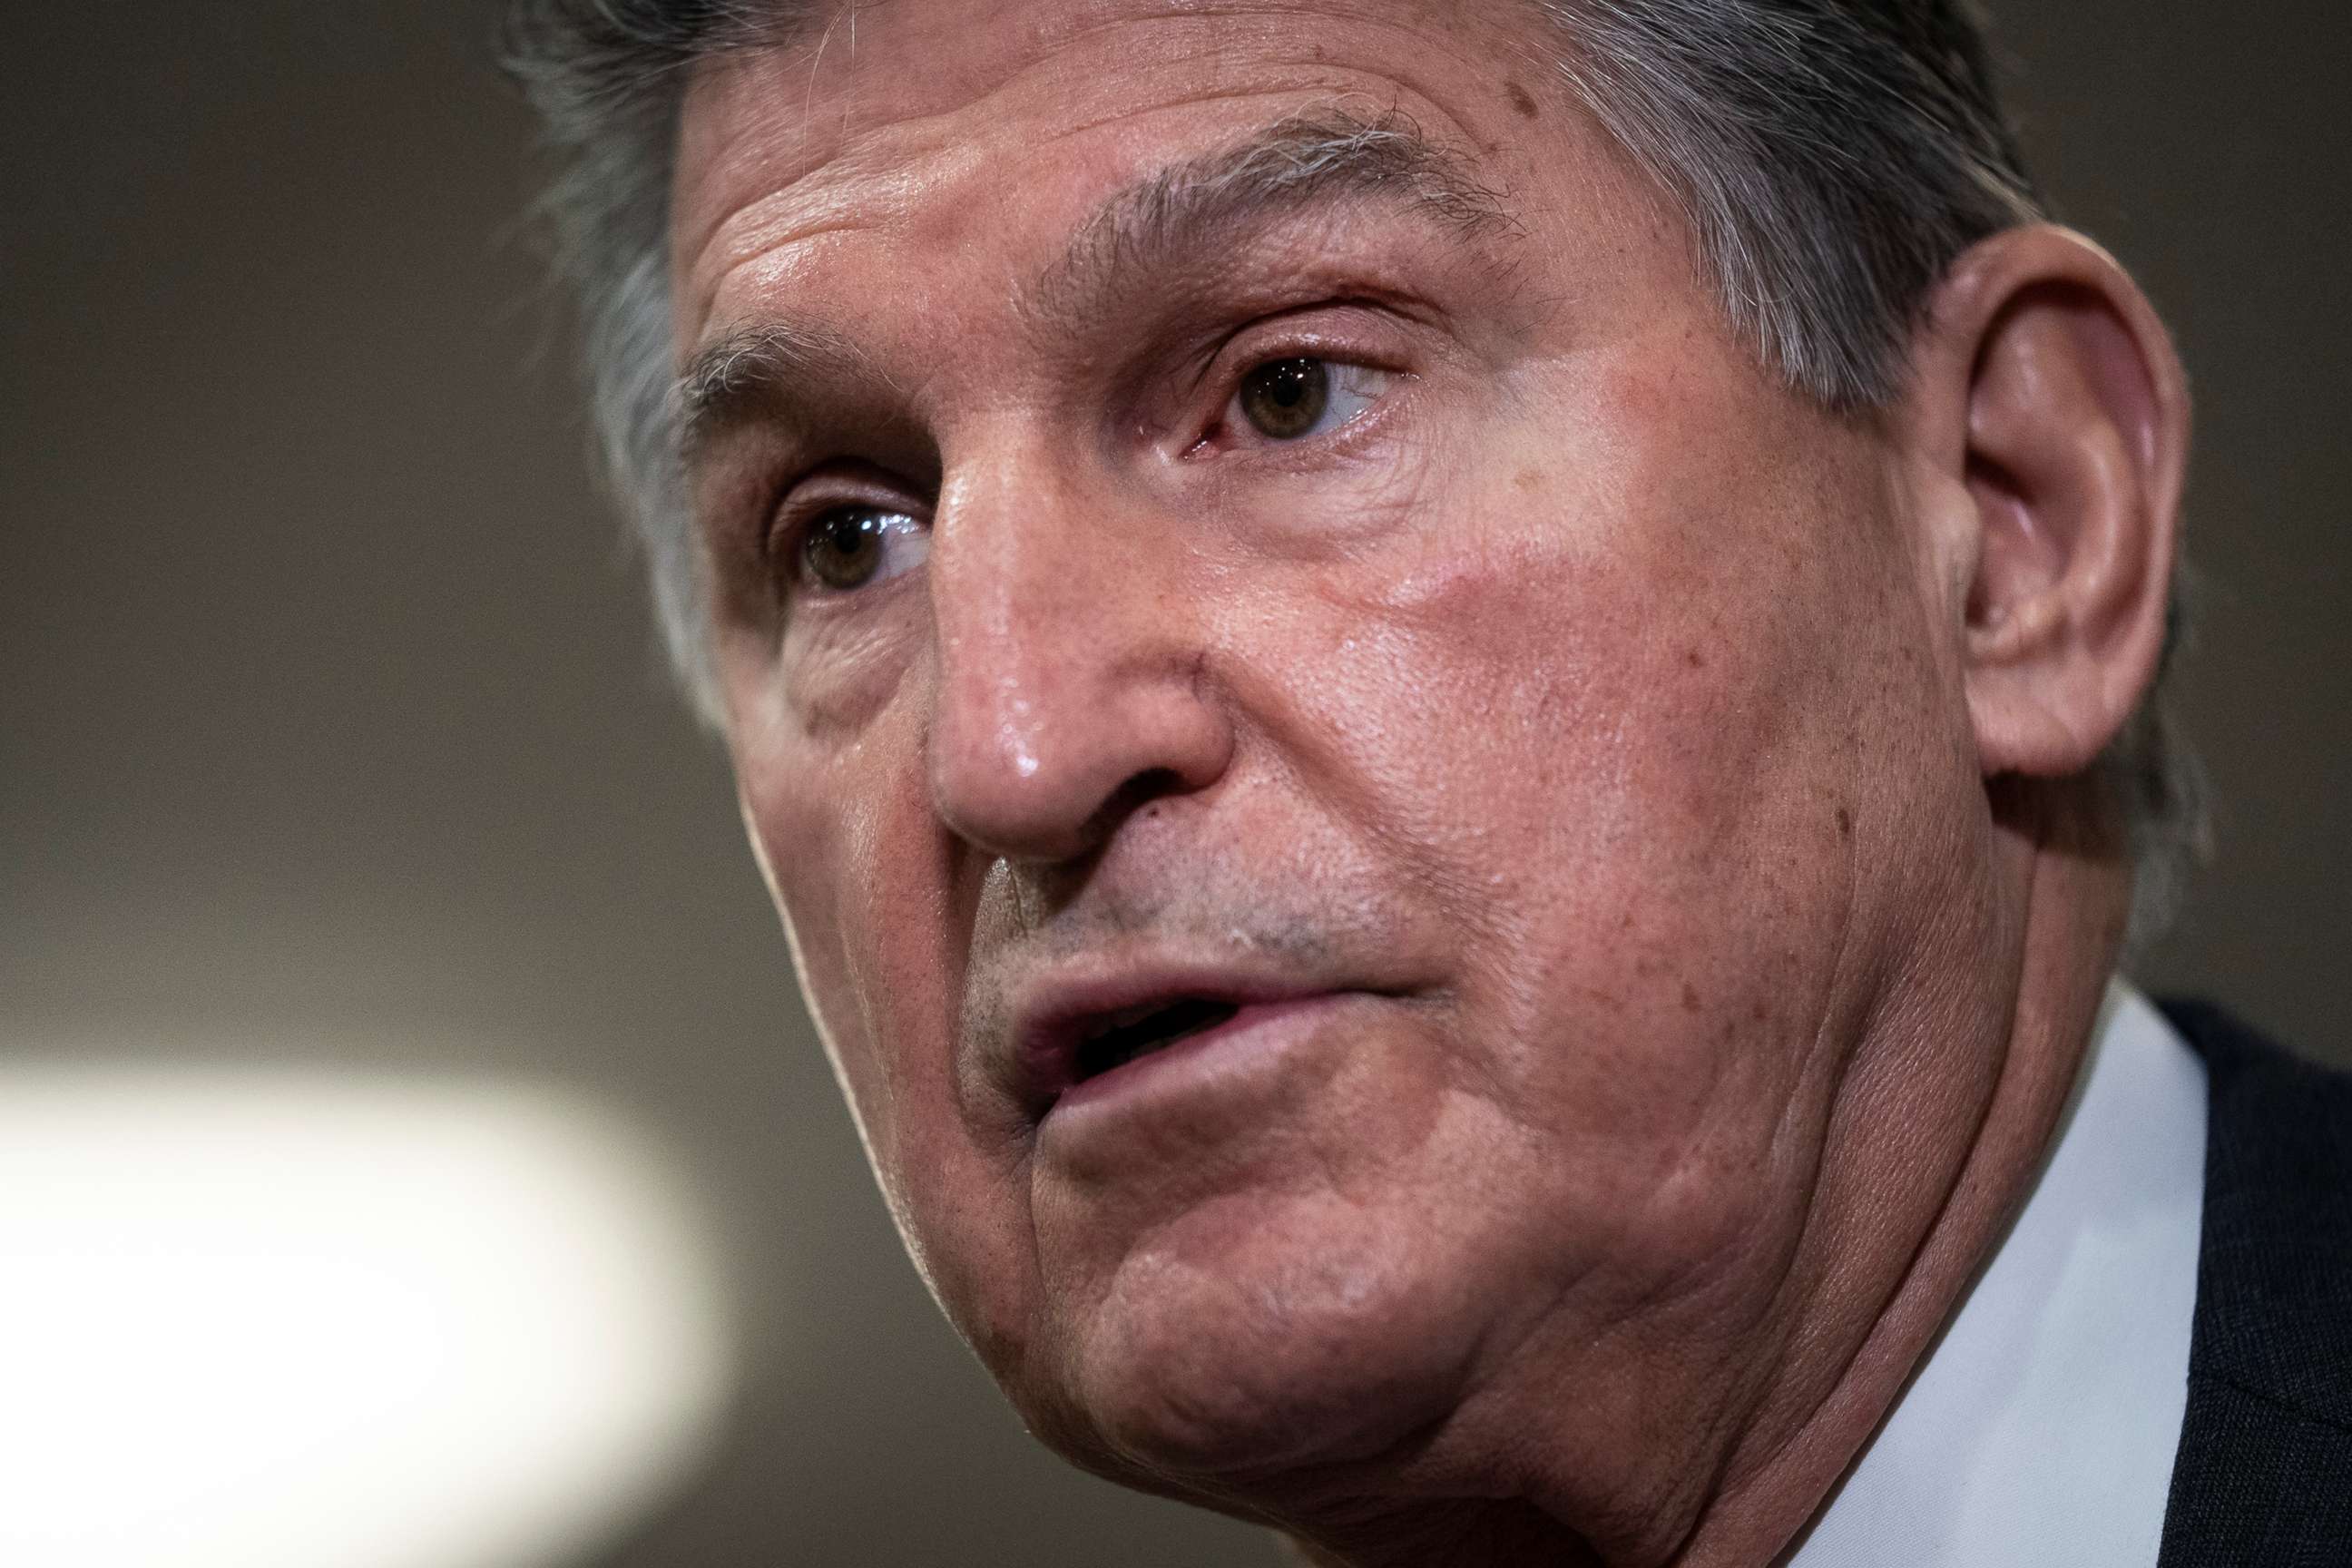 PHOTO: Sen. Joe Manchin  speaks to reporters after a closed door briefing with Senators at the U.S. Capitol Building in Washington, Feb. 03, 2022.